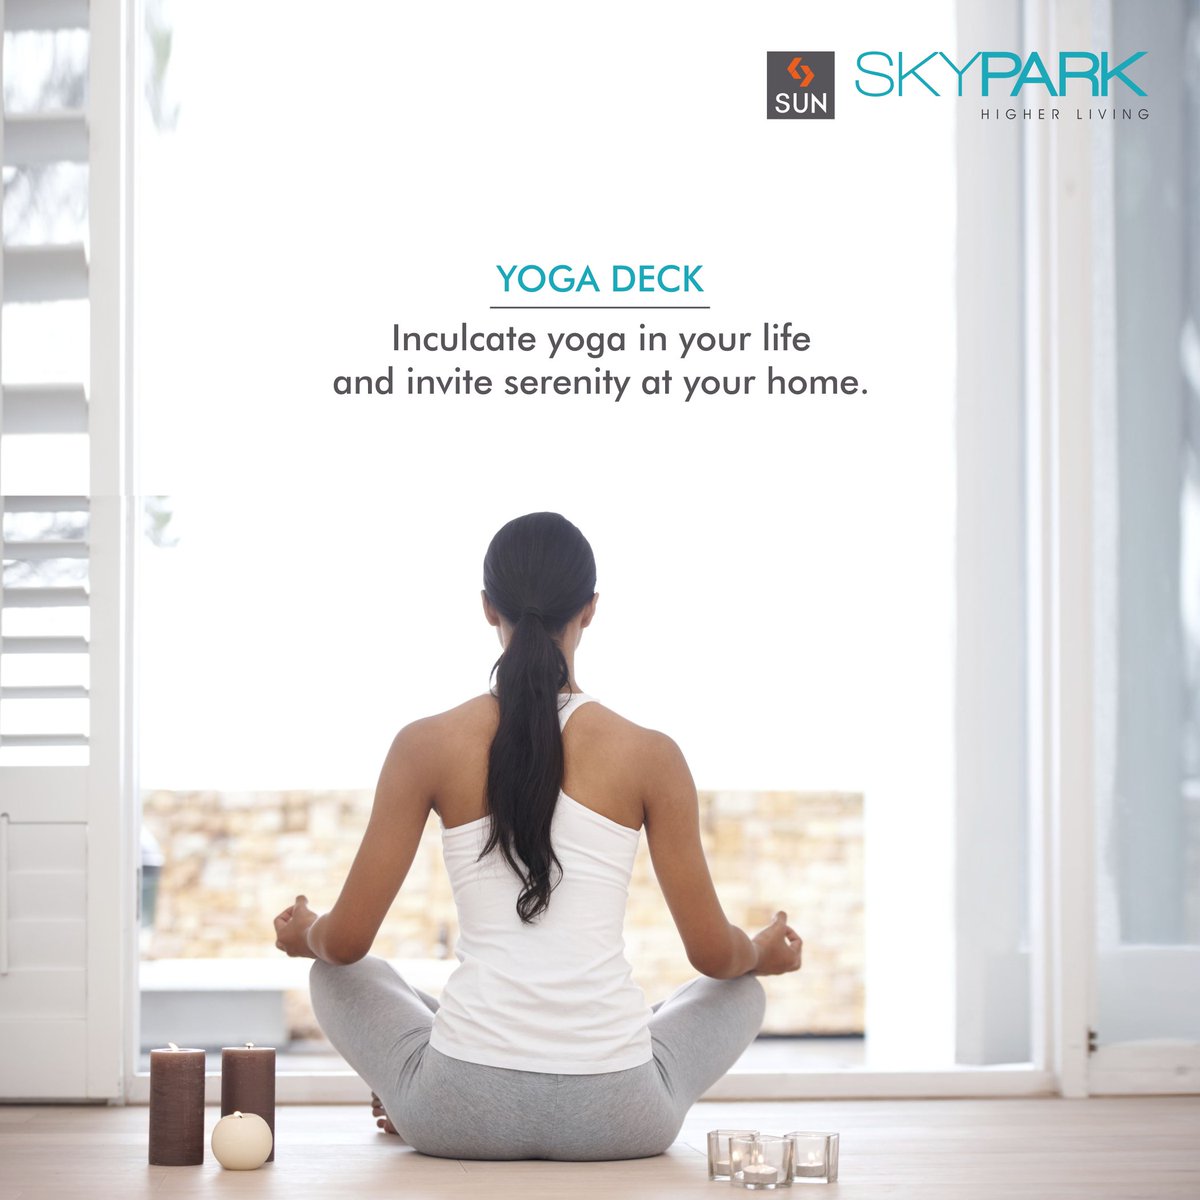 By practising yoga, it purifies your mind and soul and spread serenity at home. Enjoy the pleasure at #SunSkyPark https://t.co/di4vmoLFsN